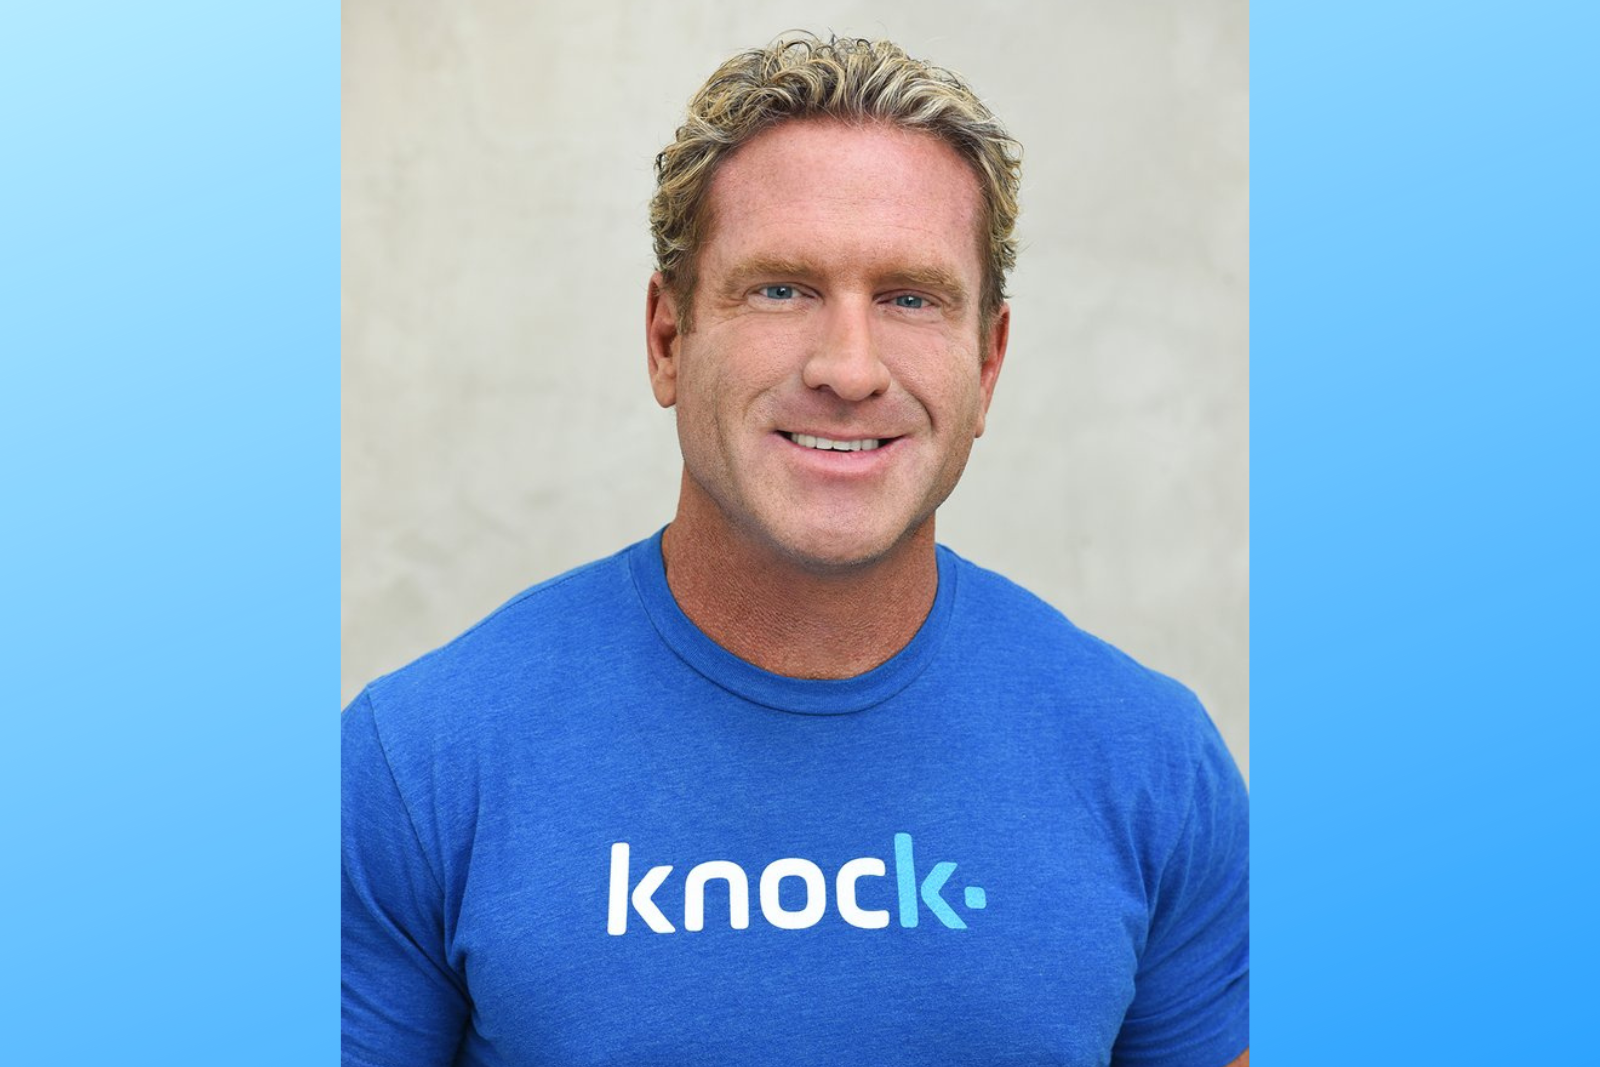 Innovations In Lending: One-On-One With Knock CEO Sean Black